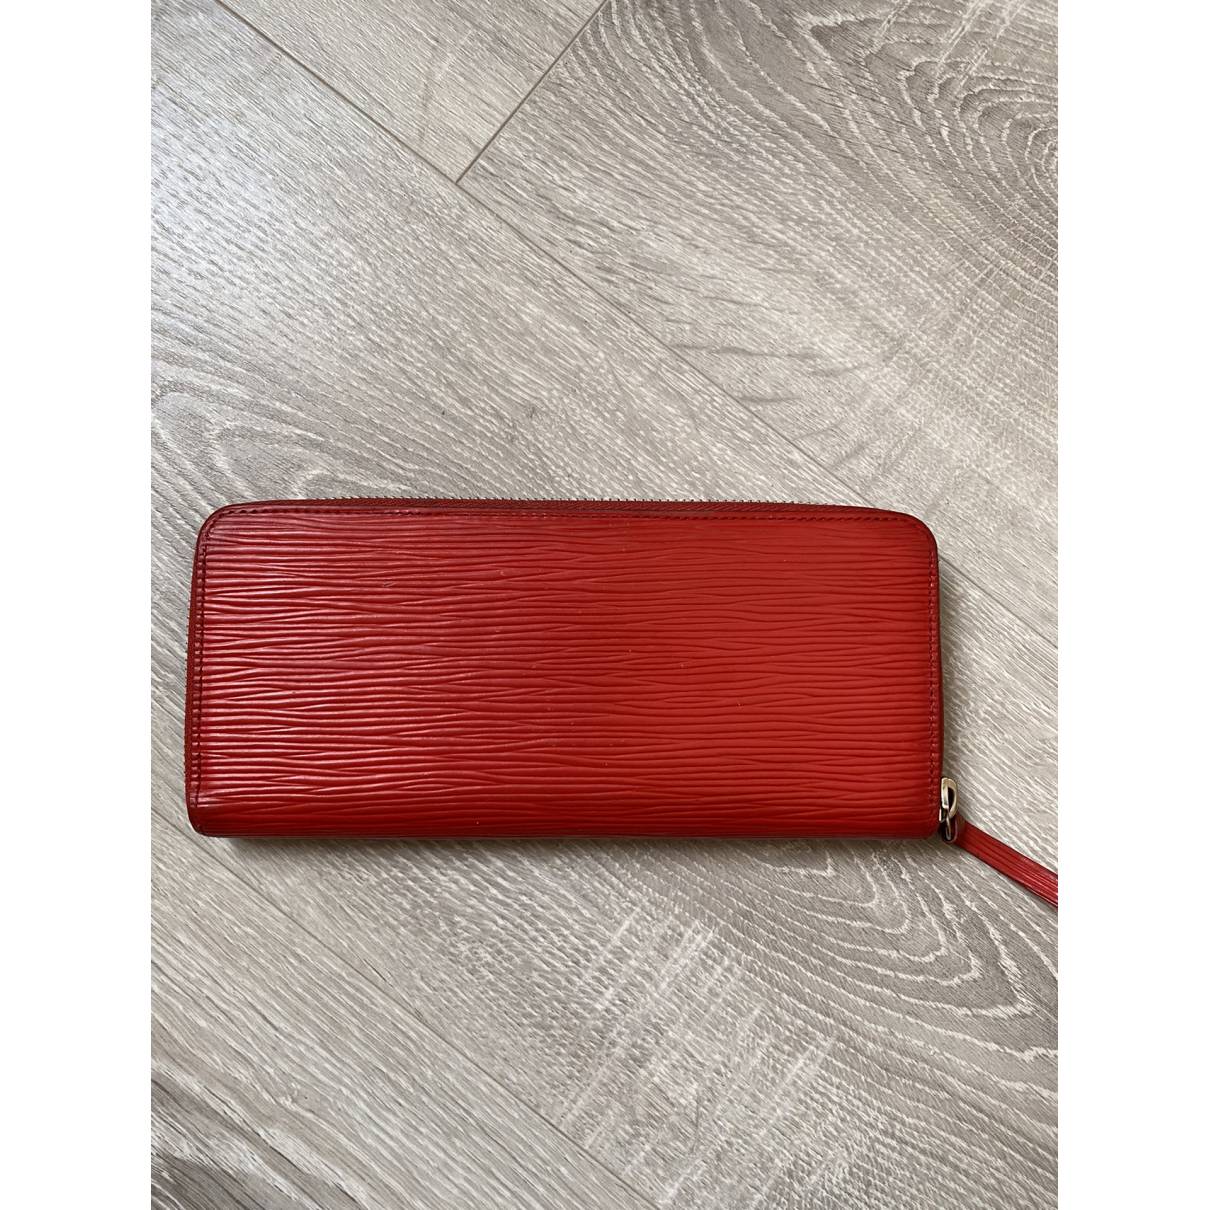 vuitton clemence wallet epi leather